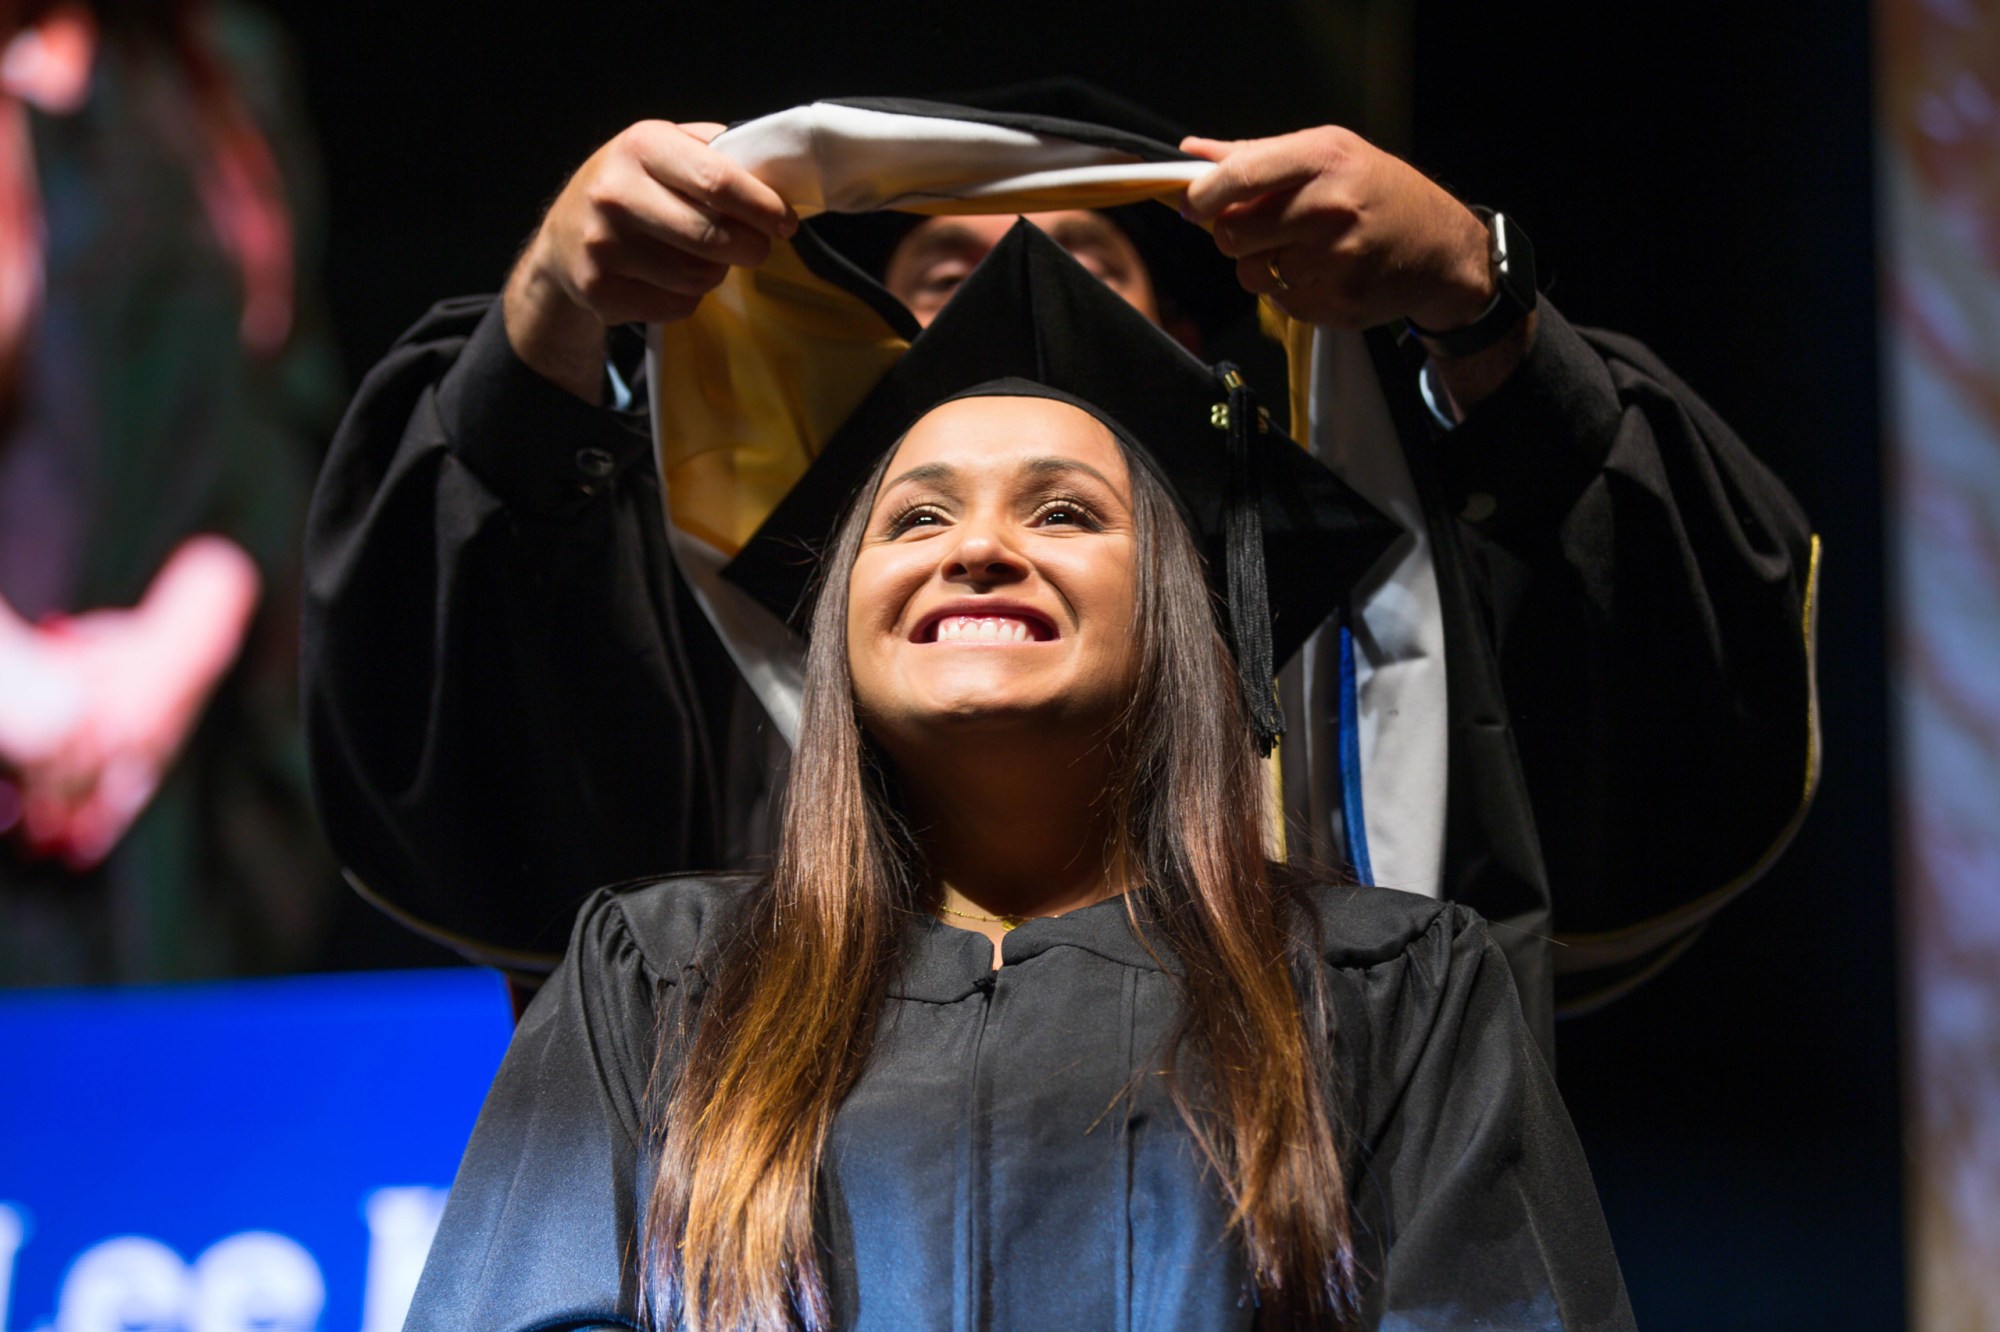 A woman receives her masters degree hood during her university's fall commencement in San Jose, California, on Wednesday, December 19, 2018. (Getty/Randy Vazquez)